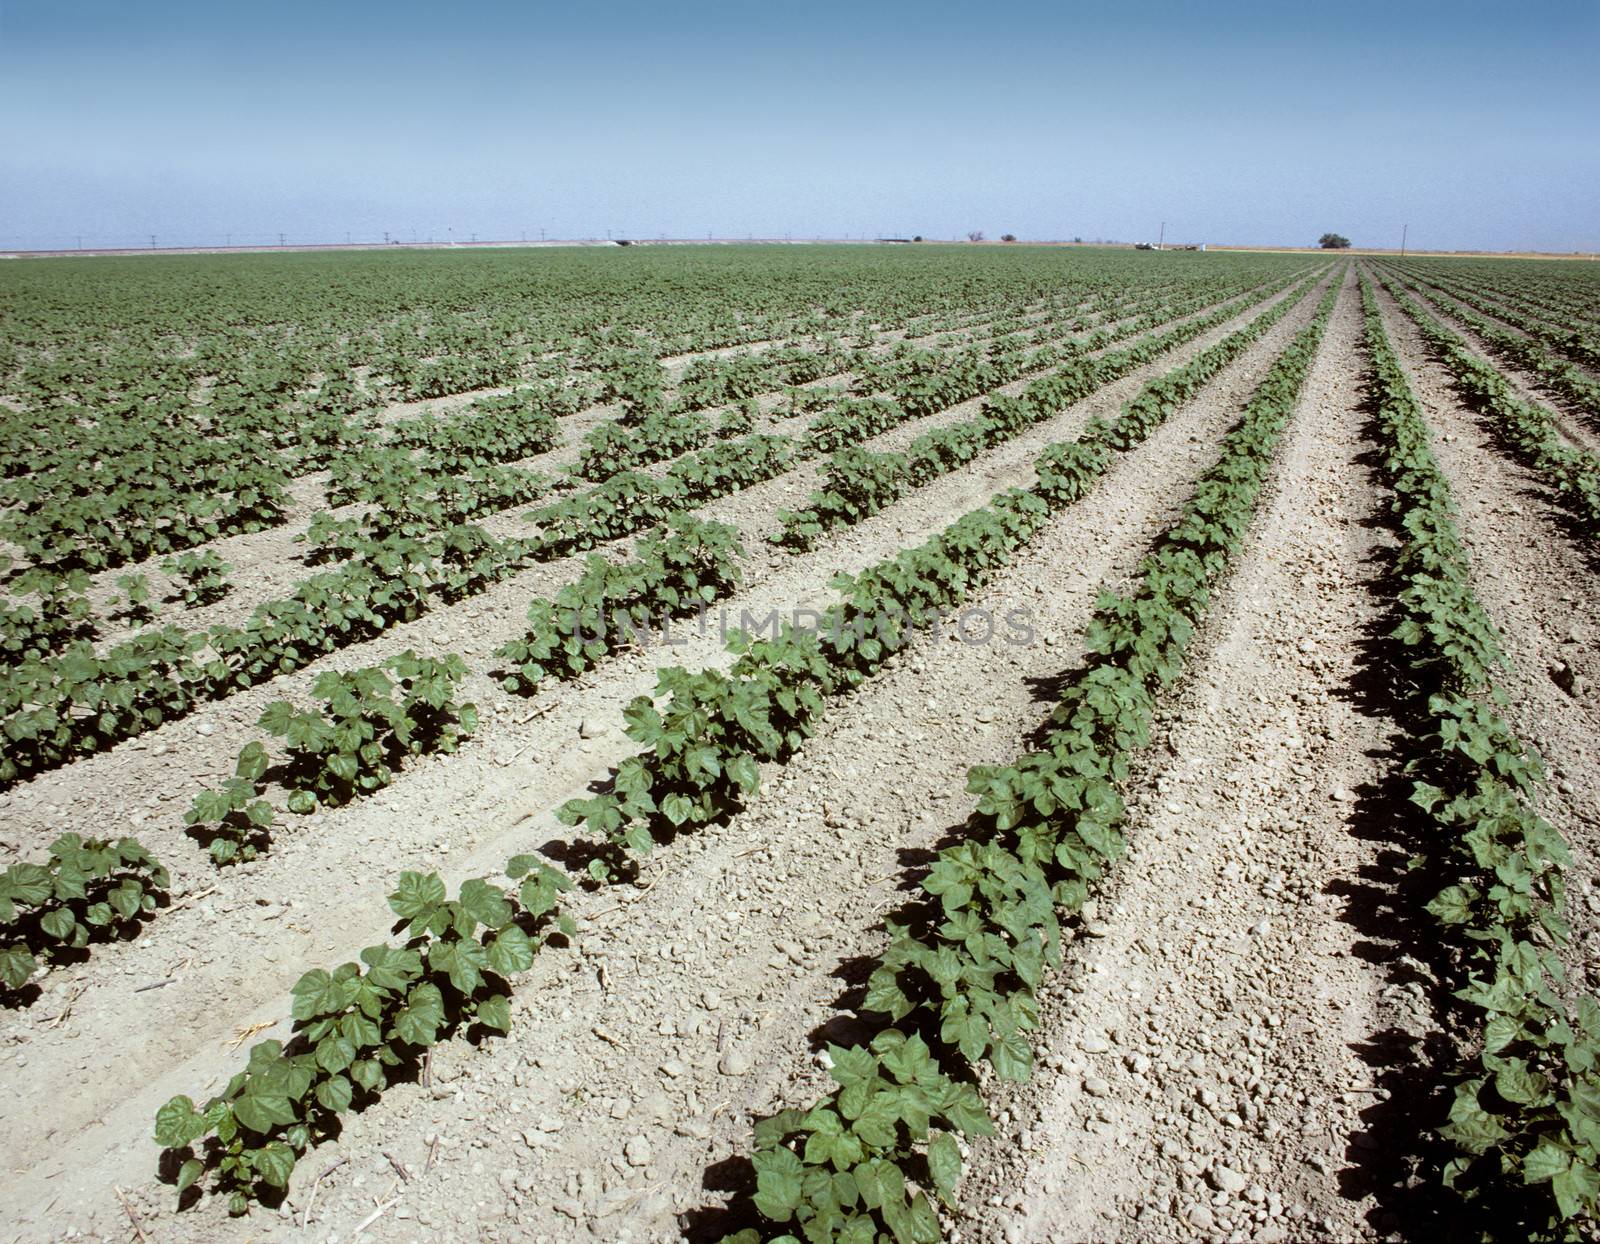 Rows of young cotton plants in the San Joaquin Valley in California, USA